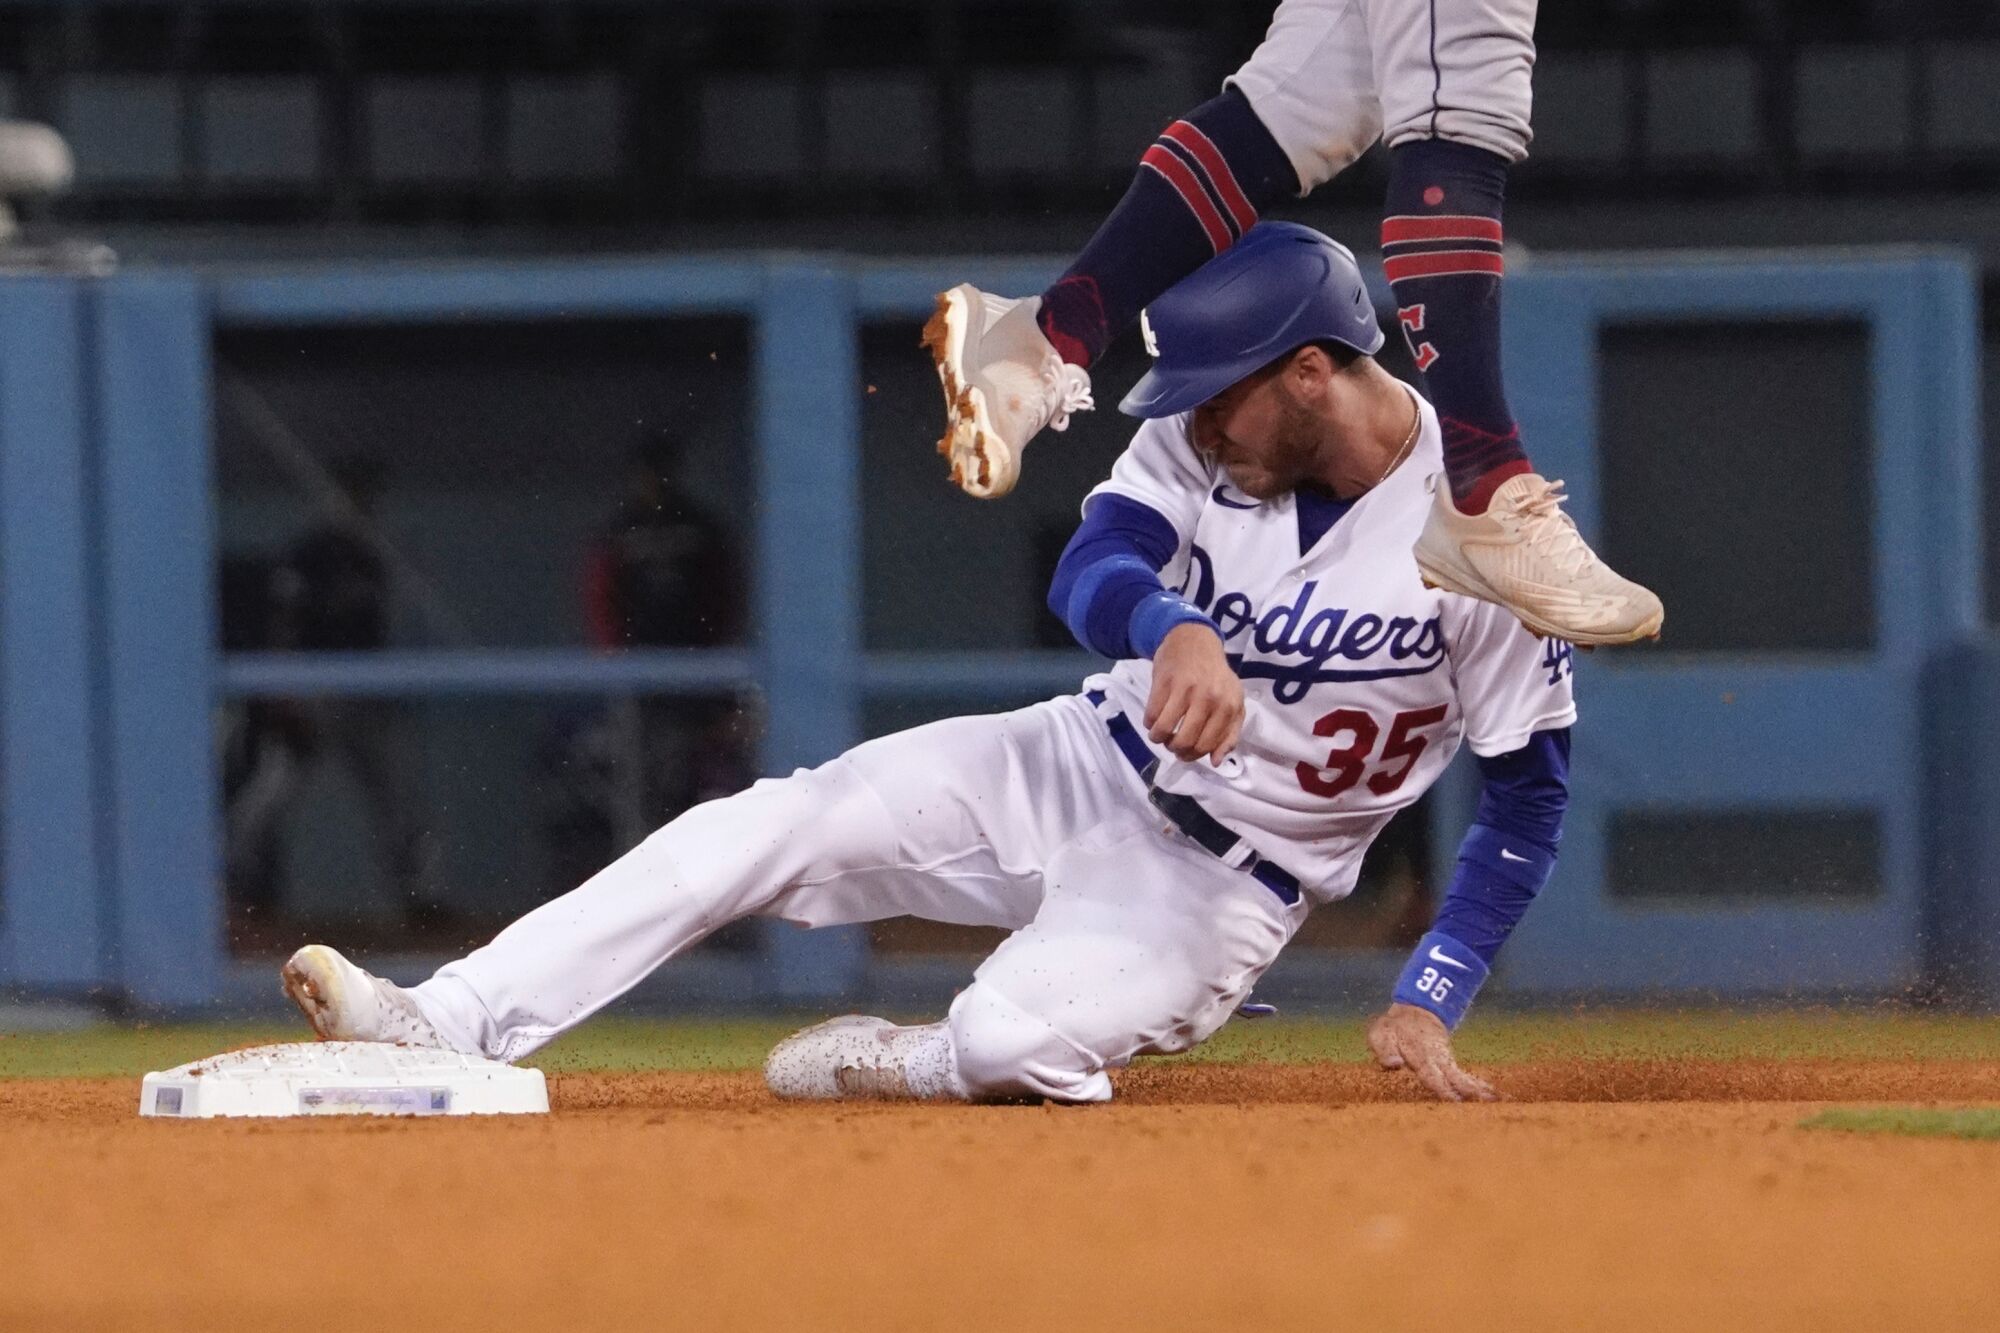 Cody Bellinger steals second base during the ninth inning of the Dodgers' loss to the Cleveland Guardians.